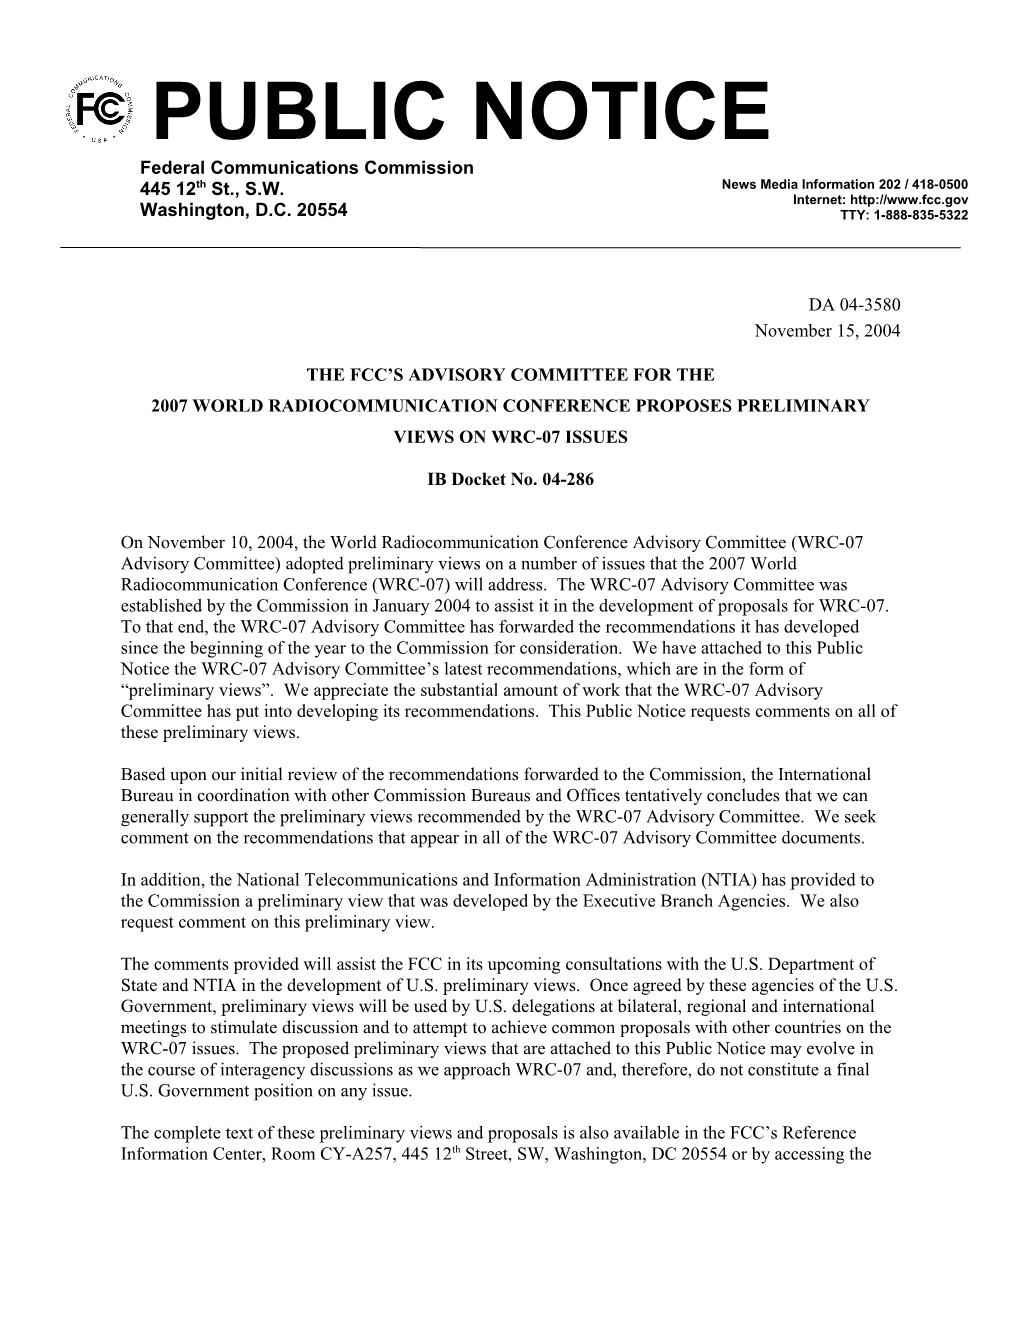 The Fcc S Advisory Committee for The